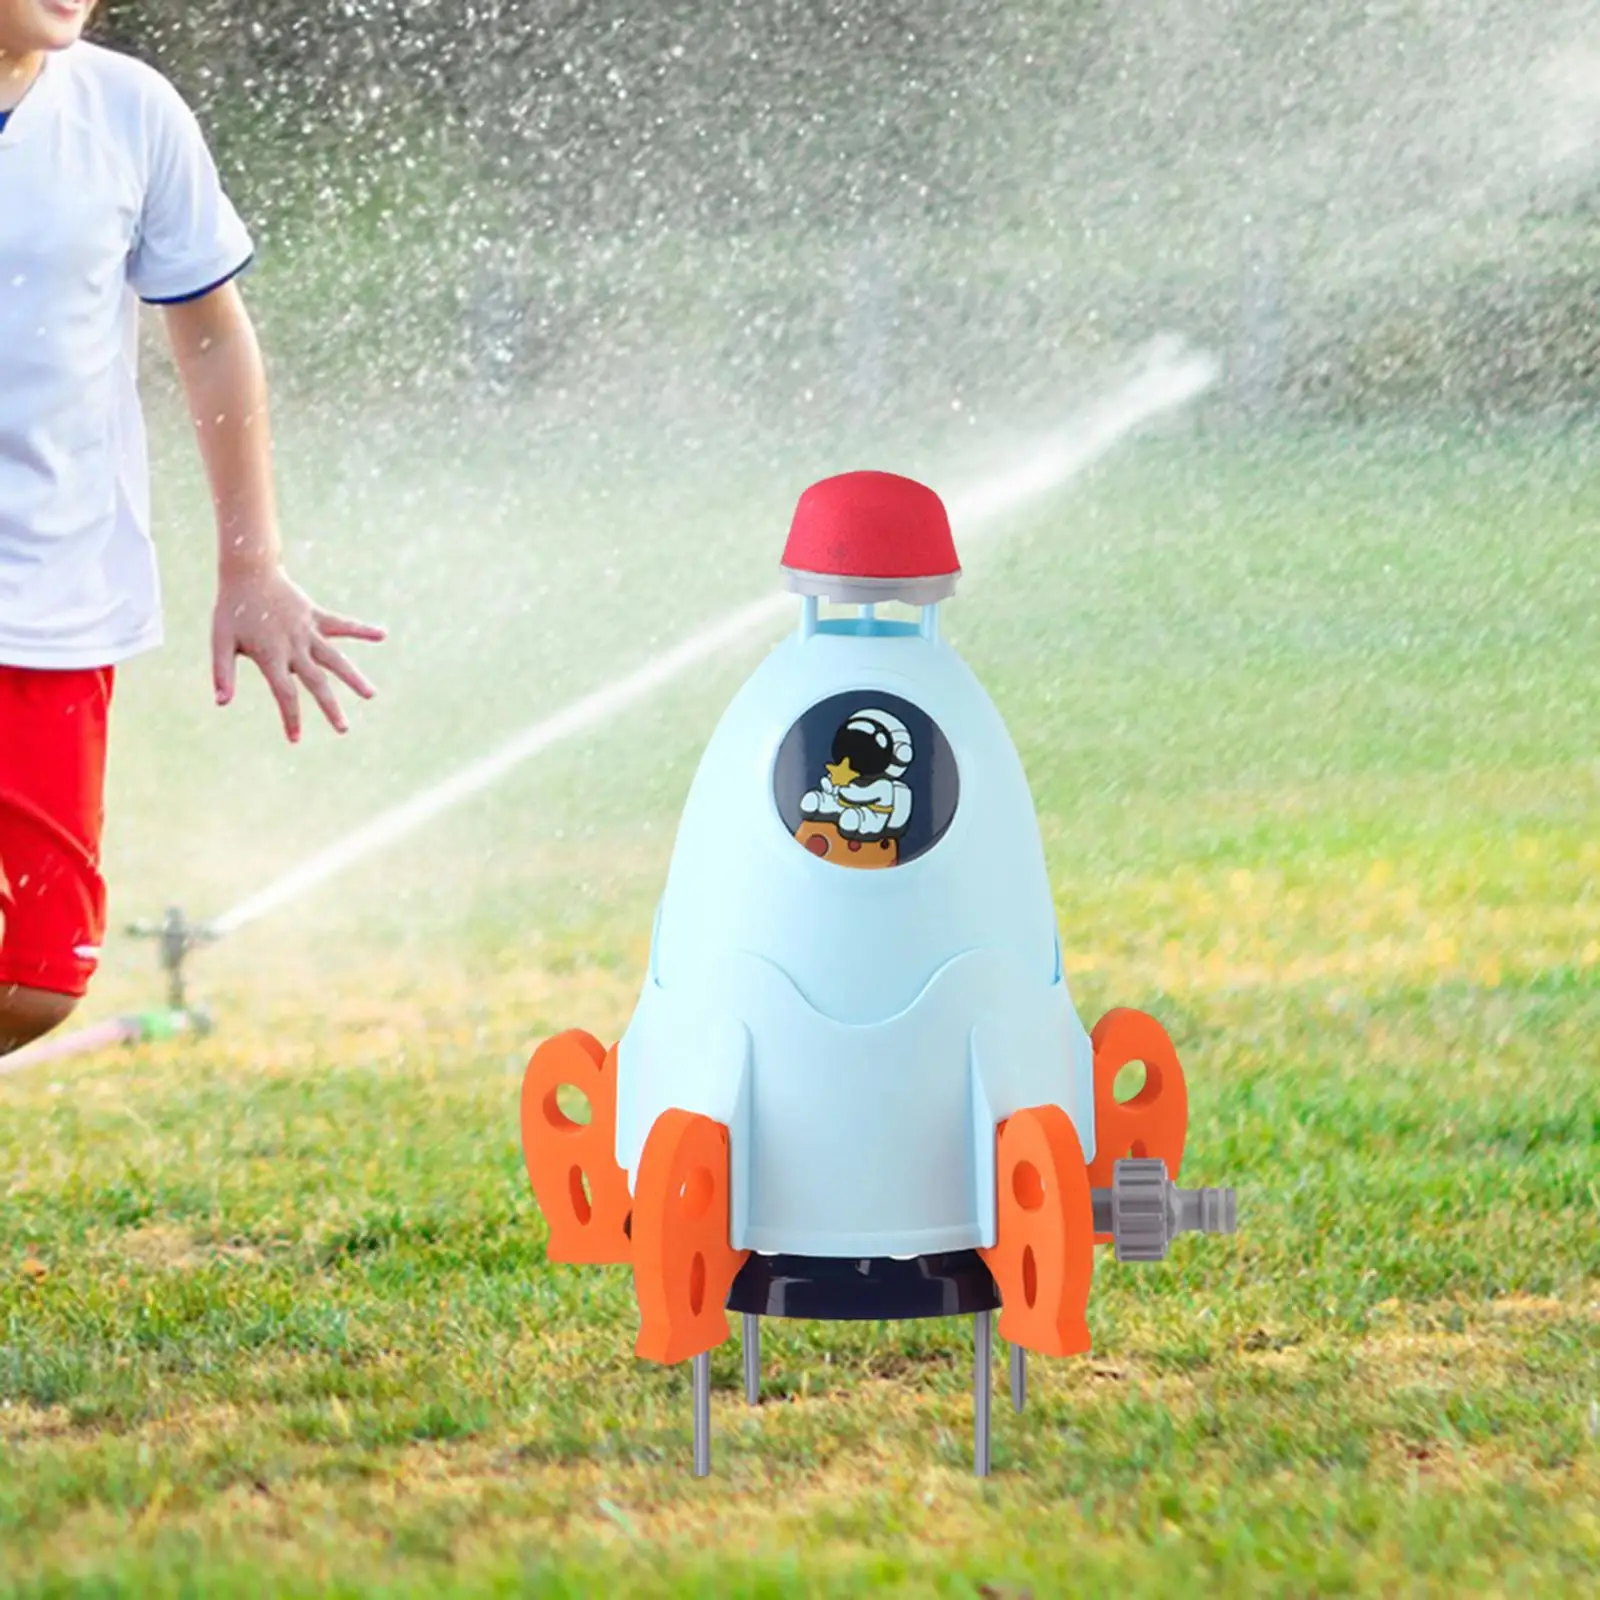 Water Spray Rocket Toys Summer Water Toys Outside Water Toys Rocket Sprinkler Toy for Beach Yard Swimming Pool Outdoor